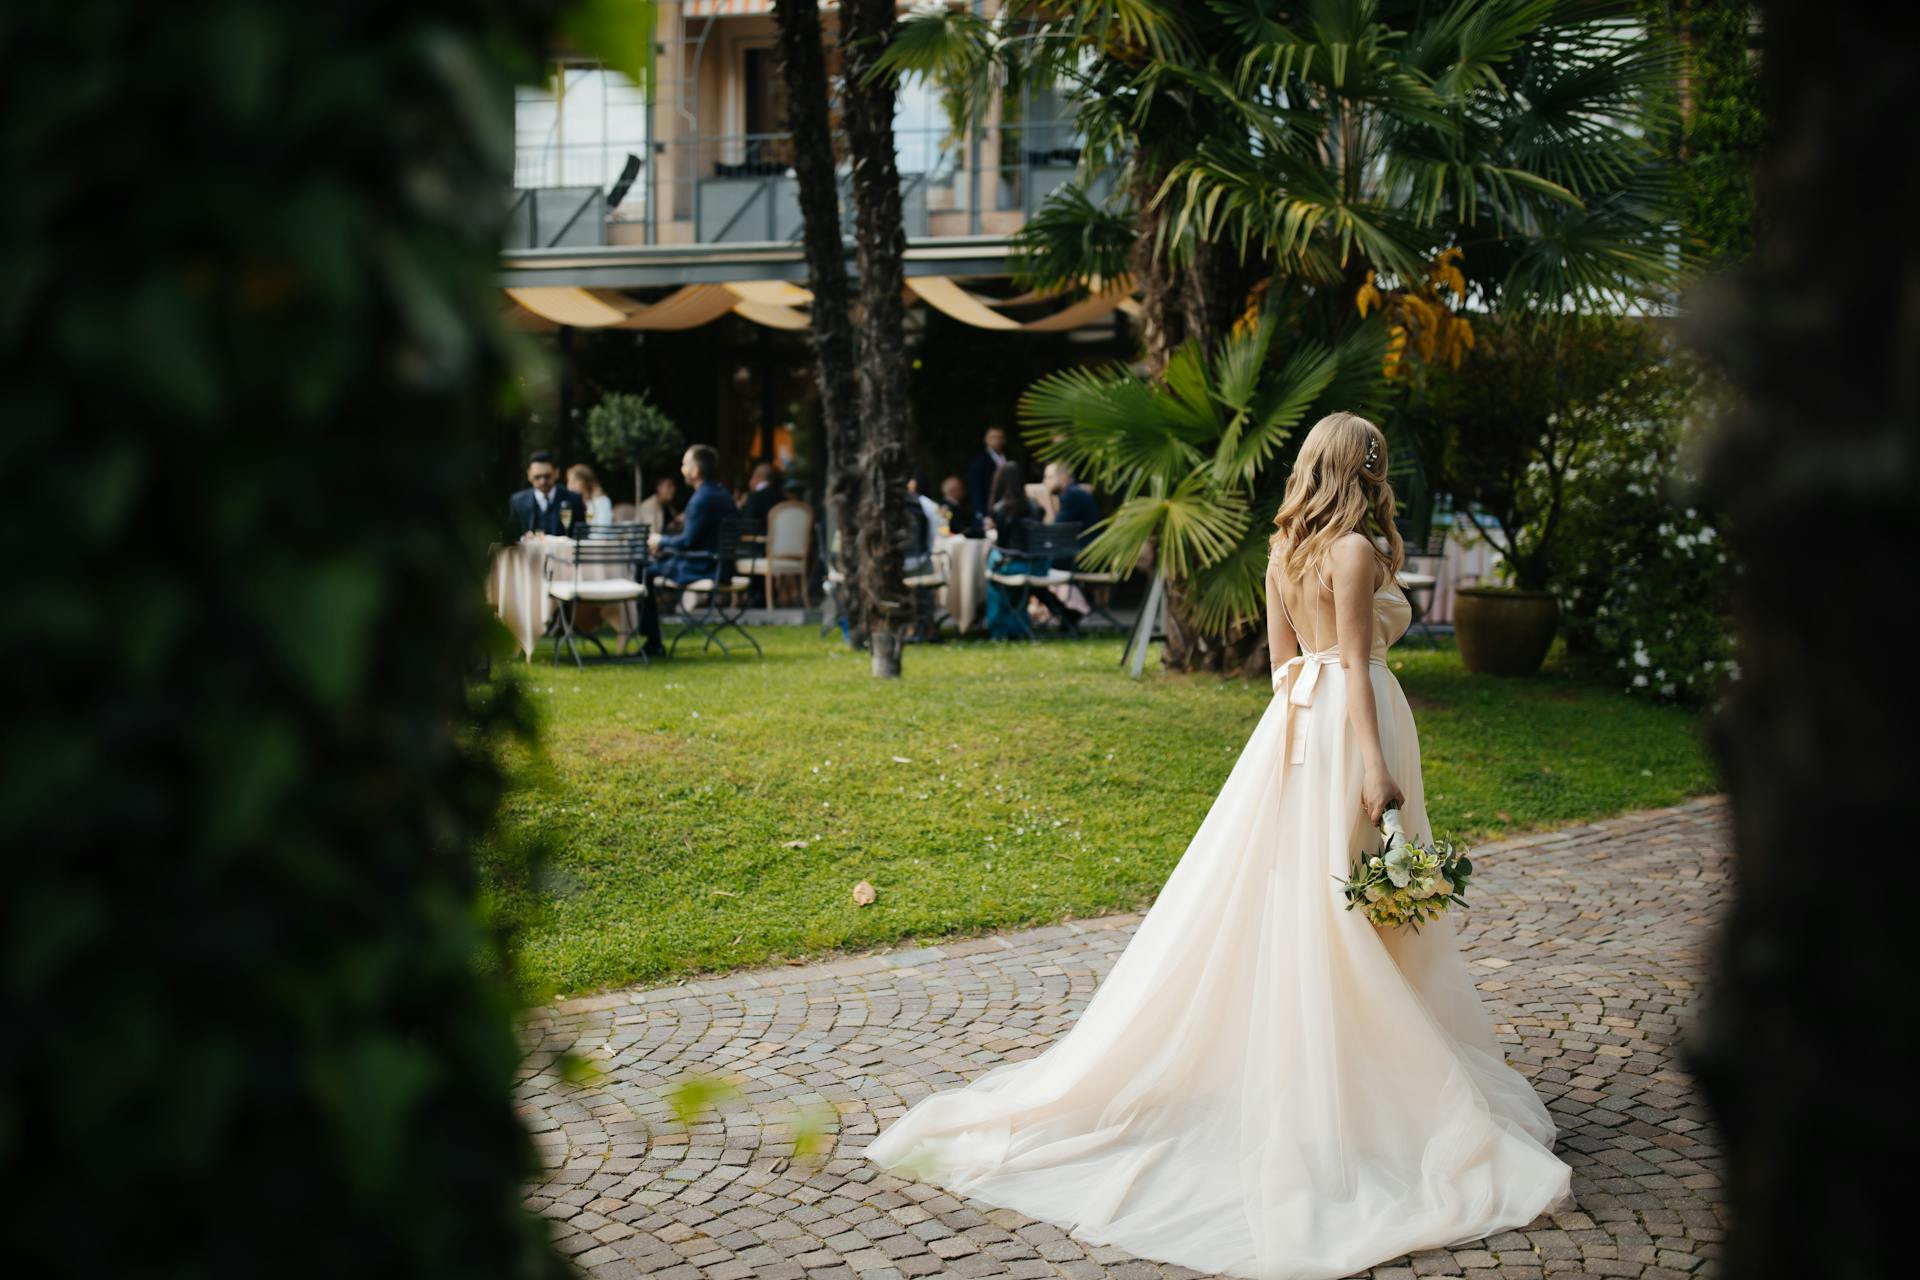 A bride holding a bouquet standing on a brick pathway | Source: Pexels